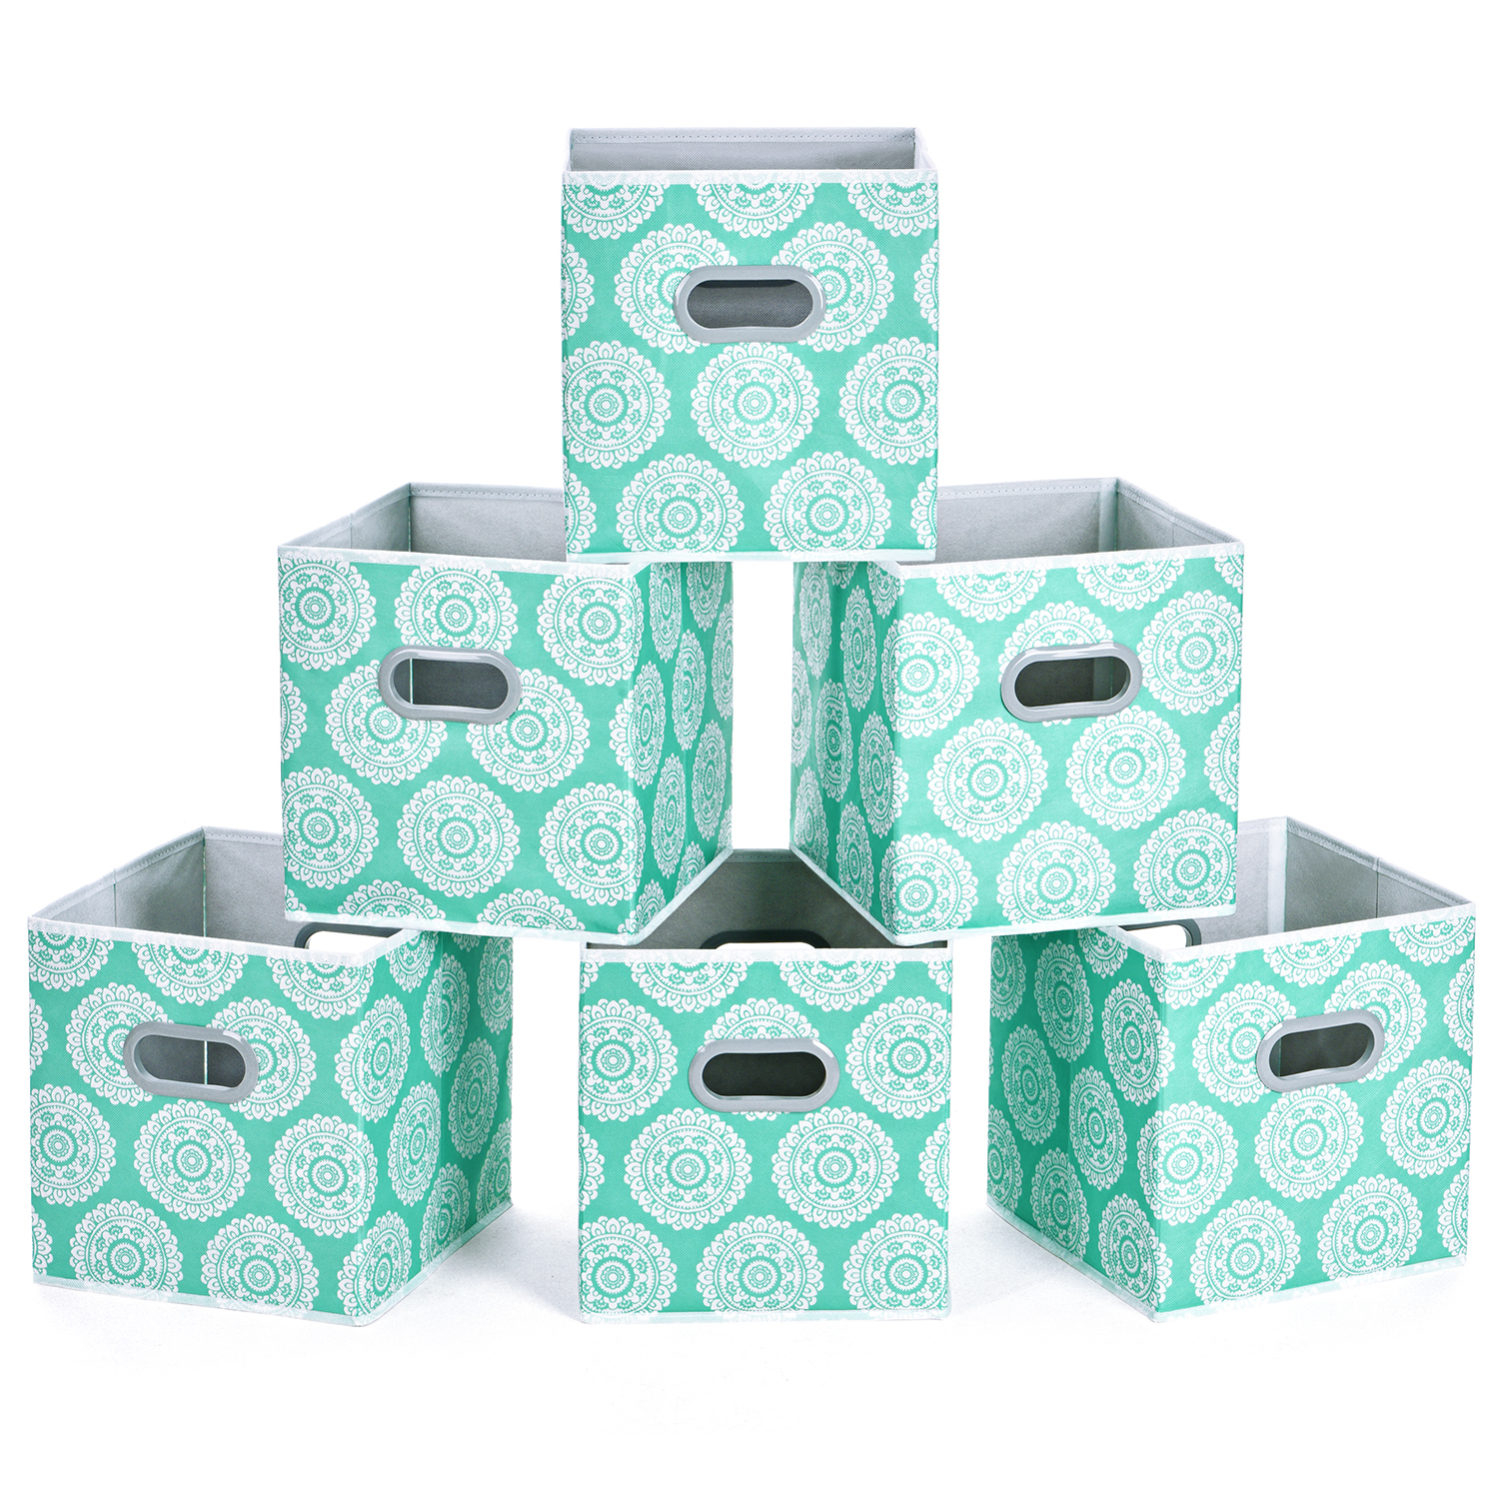 Cloth Storage Bins Maidmax Set Of 6 Foldable Collapsible Fabric Cubes Organizers Basket With Dual Plastic Handles Aqua Flower throughout sizing 1499 X 1500